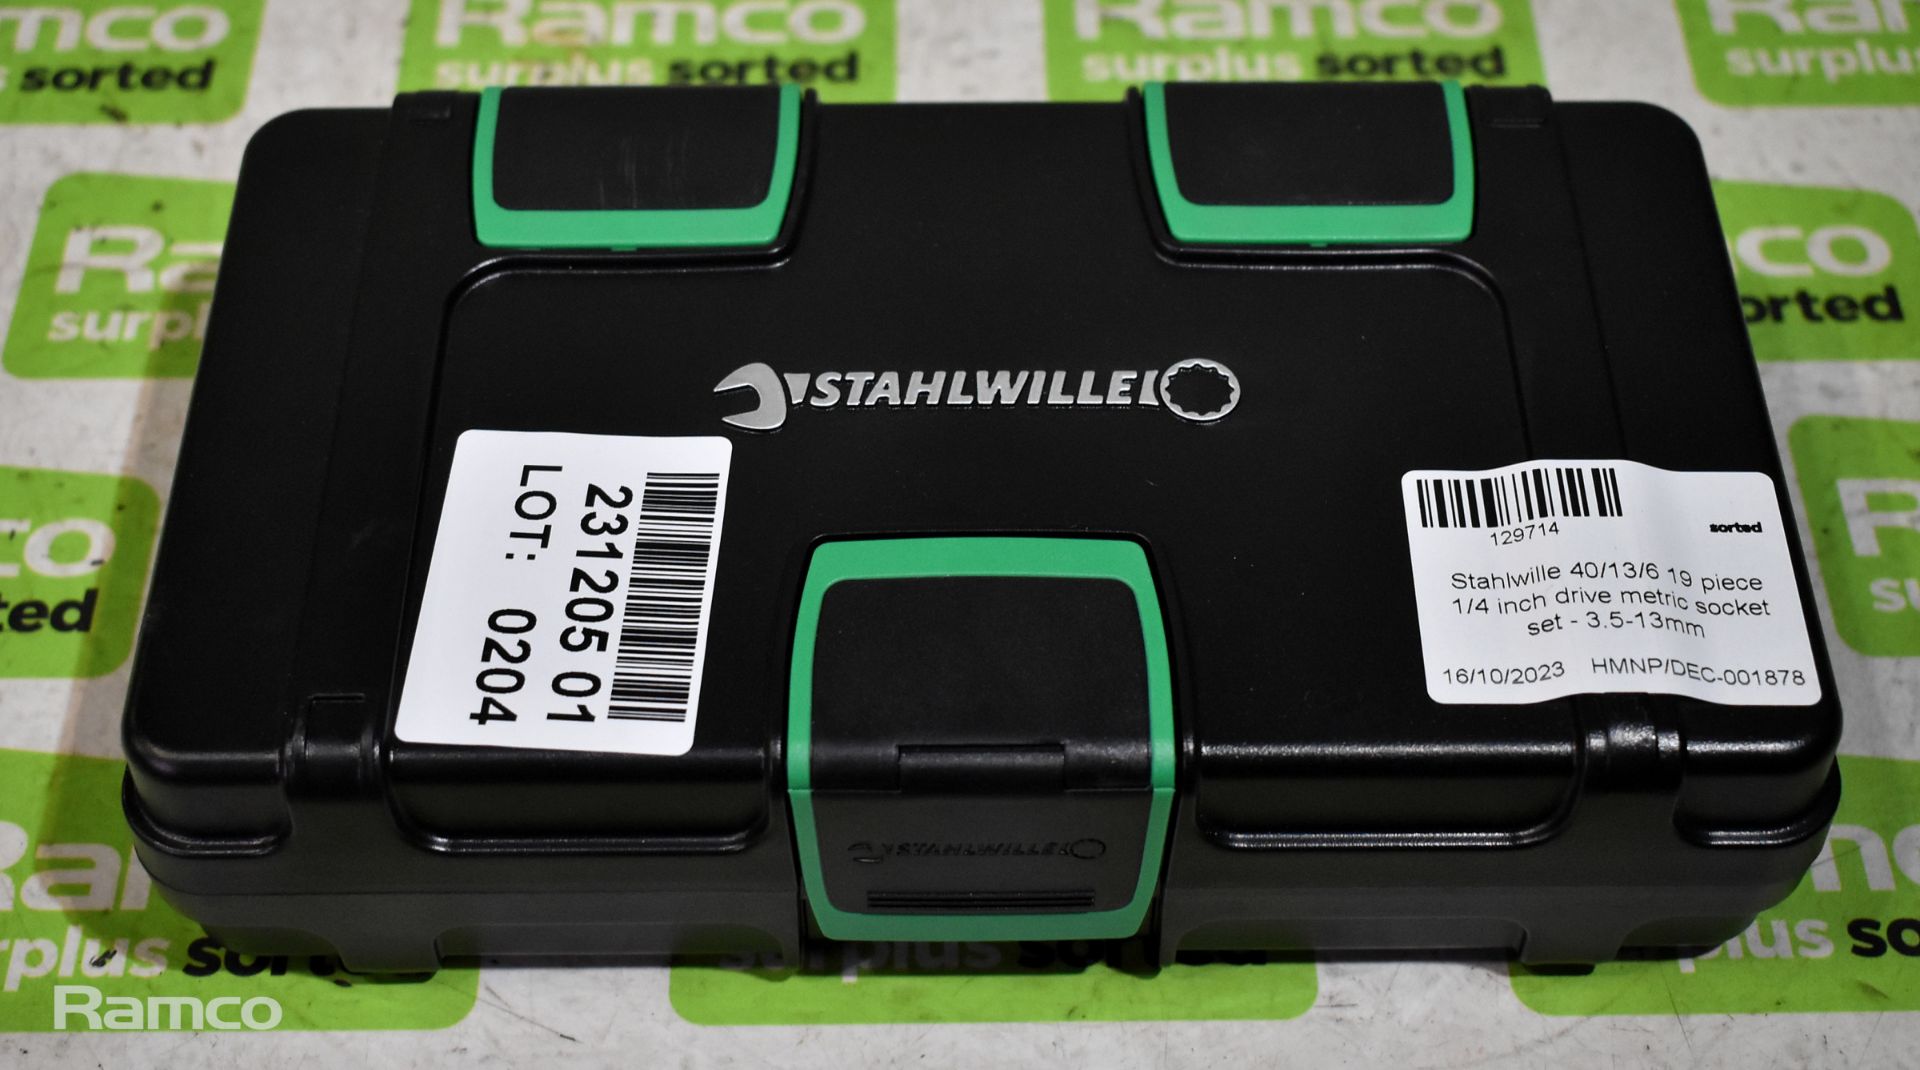 Stahlwille 40/13/6 19 piece 1/4 inch drive metric socket set - 3.5-13mm - Image 4 of 4